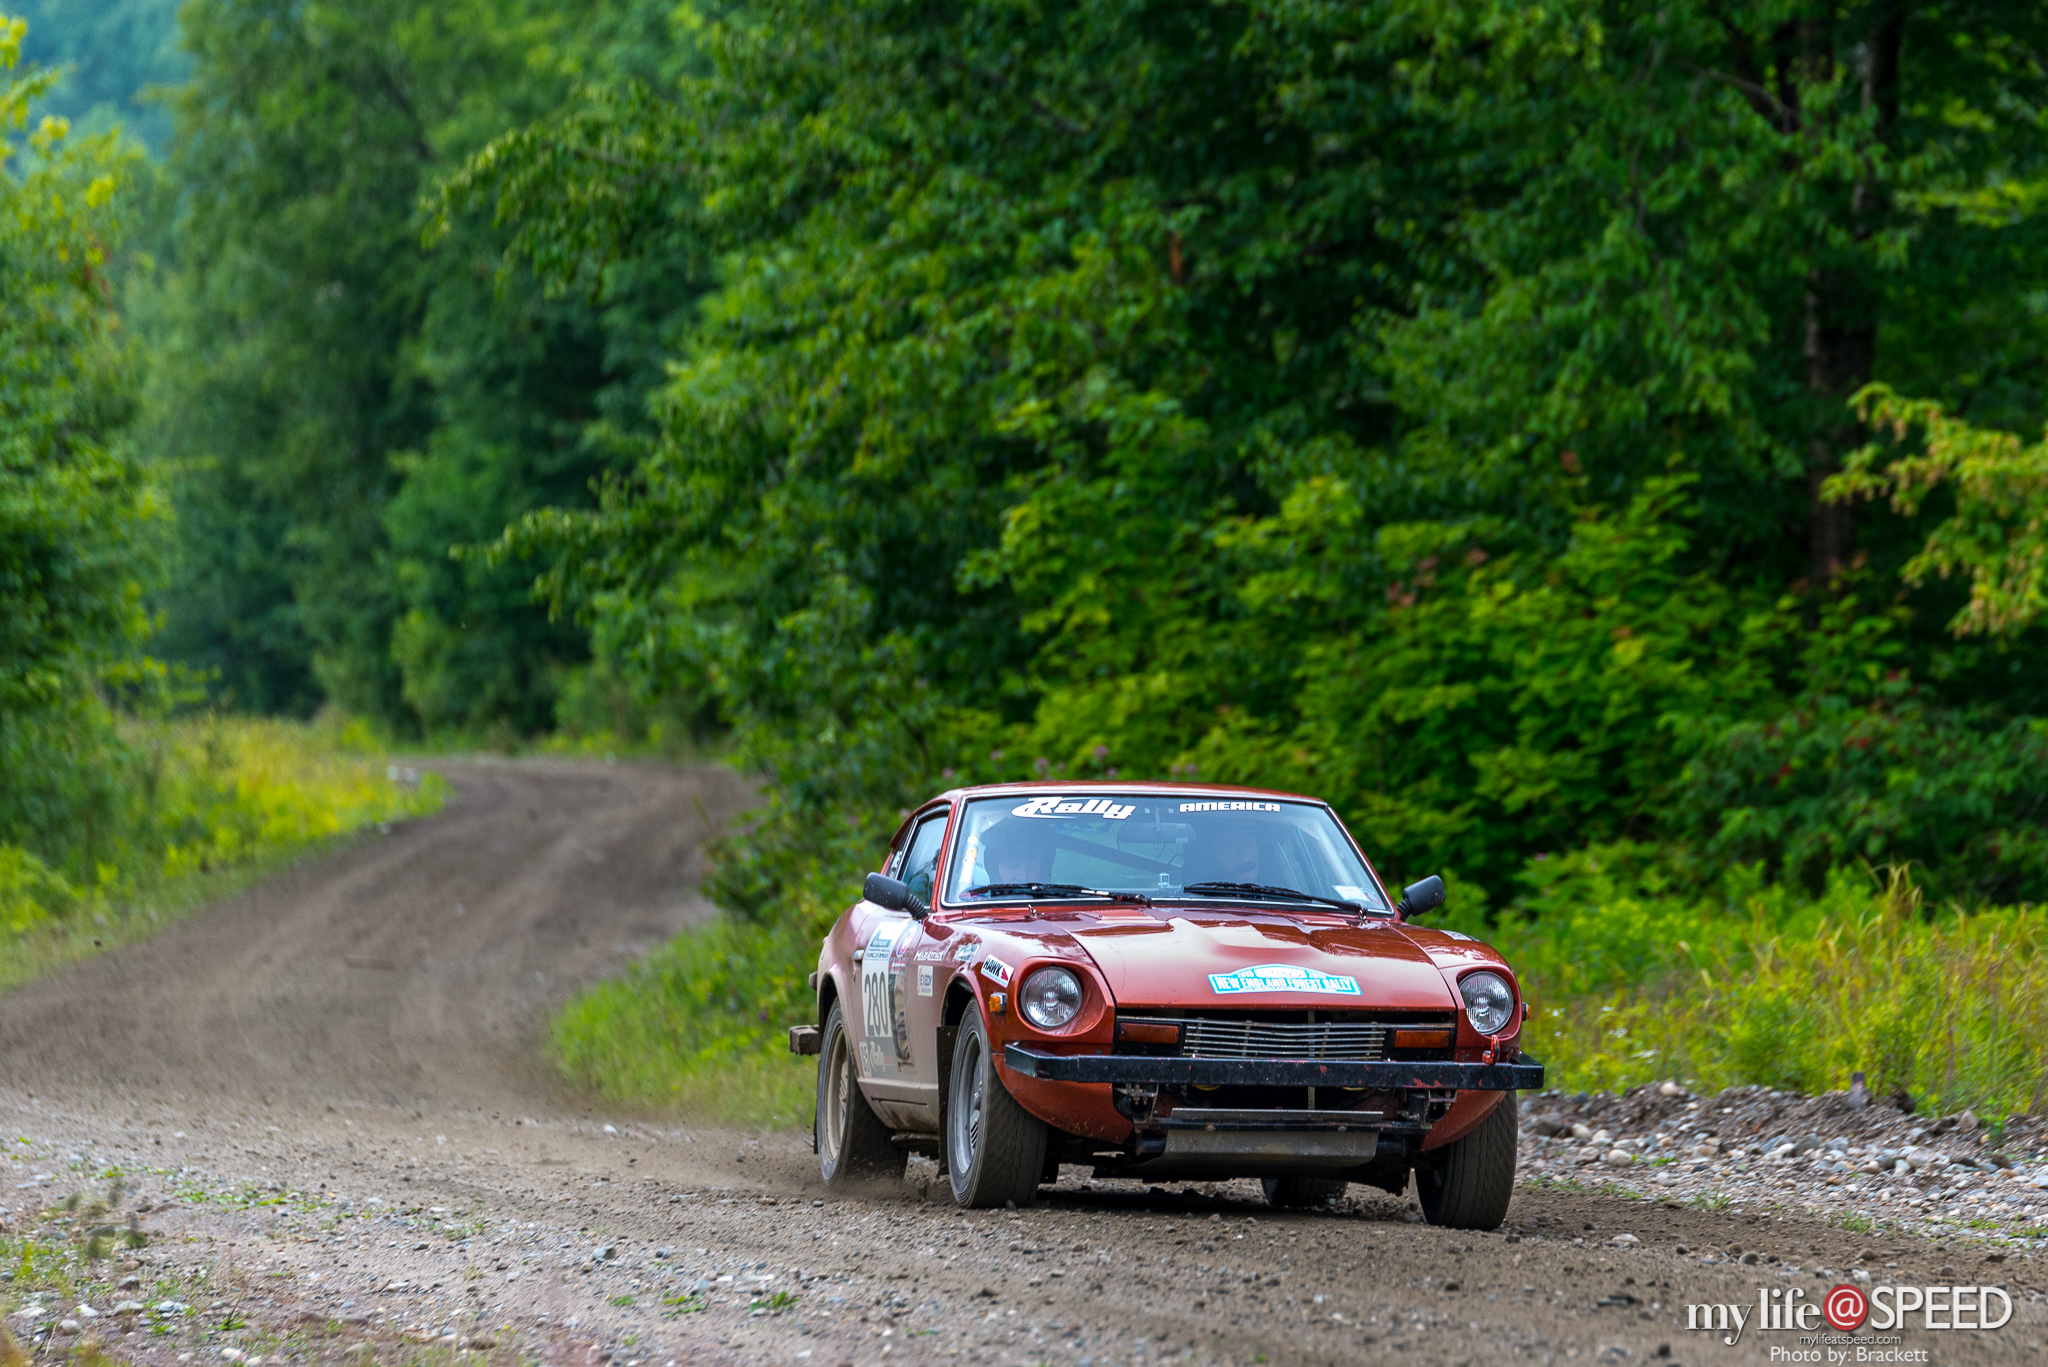 Healey/Johnson and their Datsun 280Z